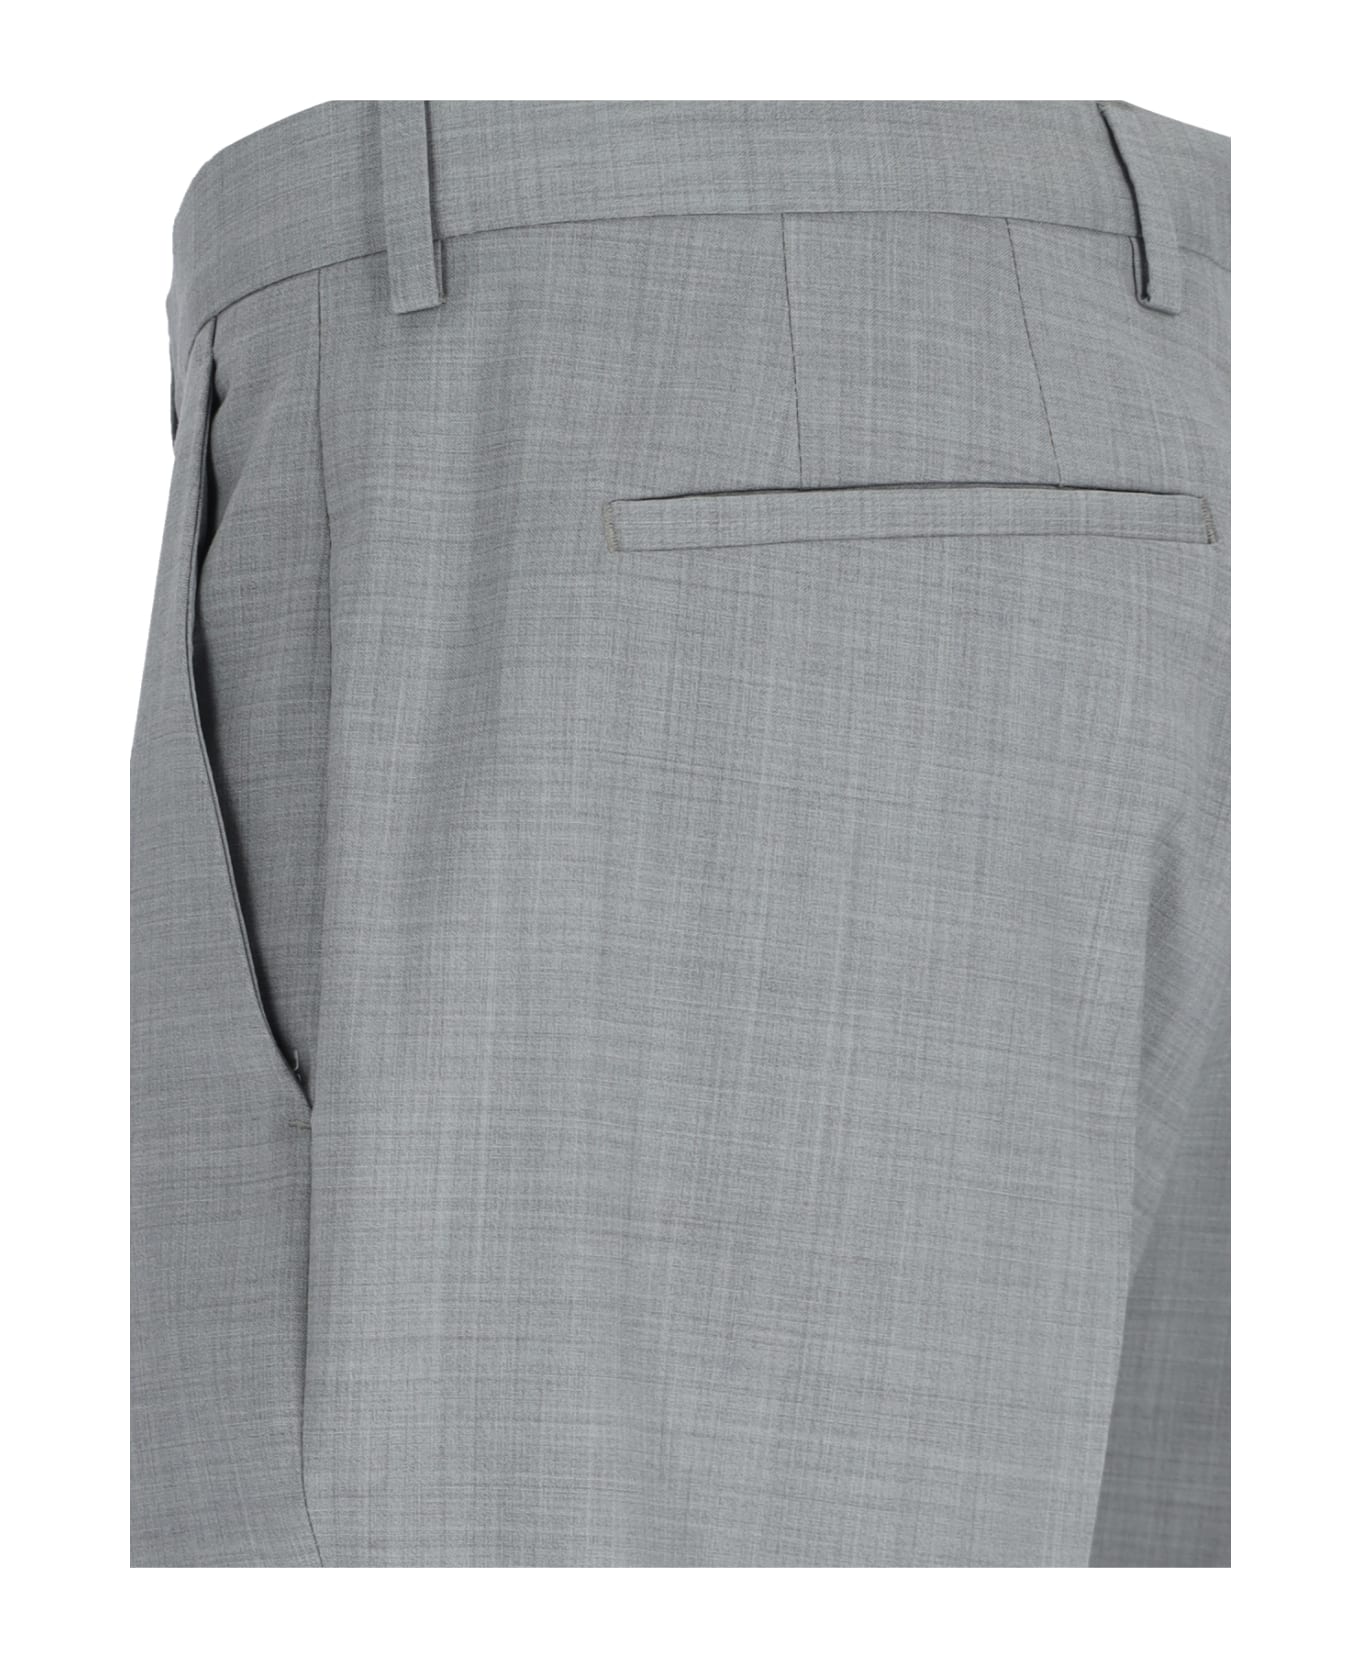 Paul Smith Classic Trousers - Gray ボトムス